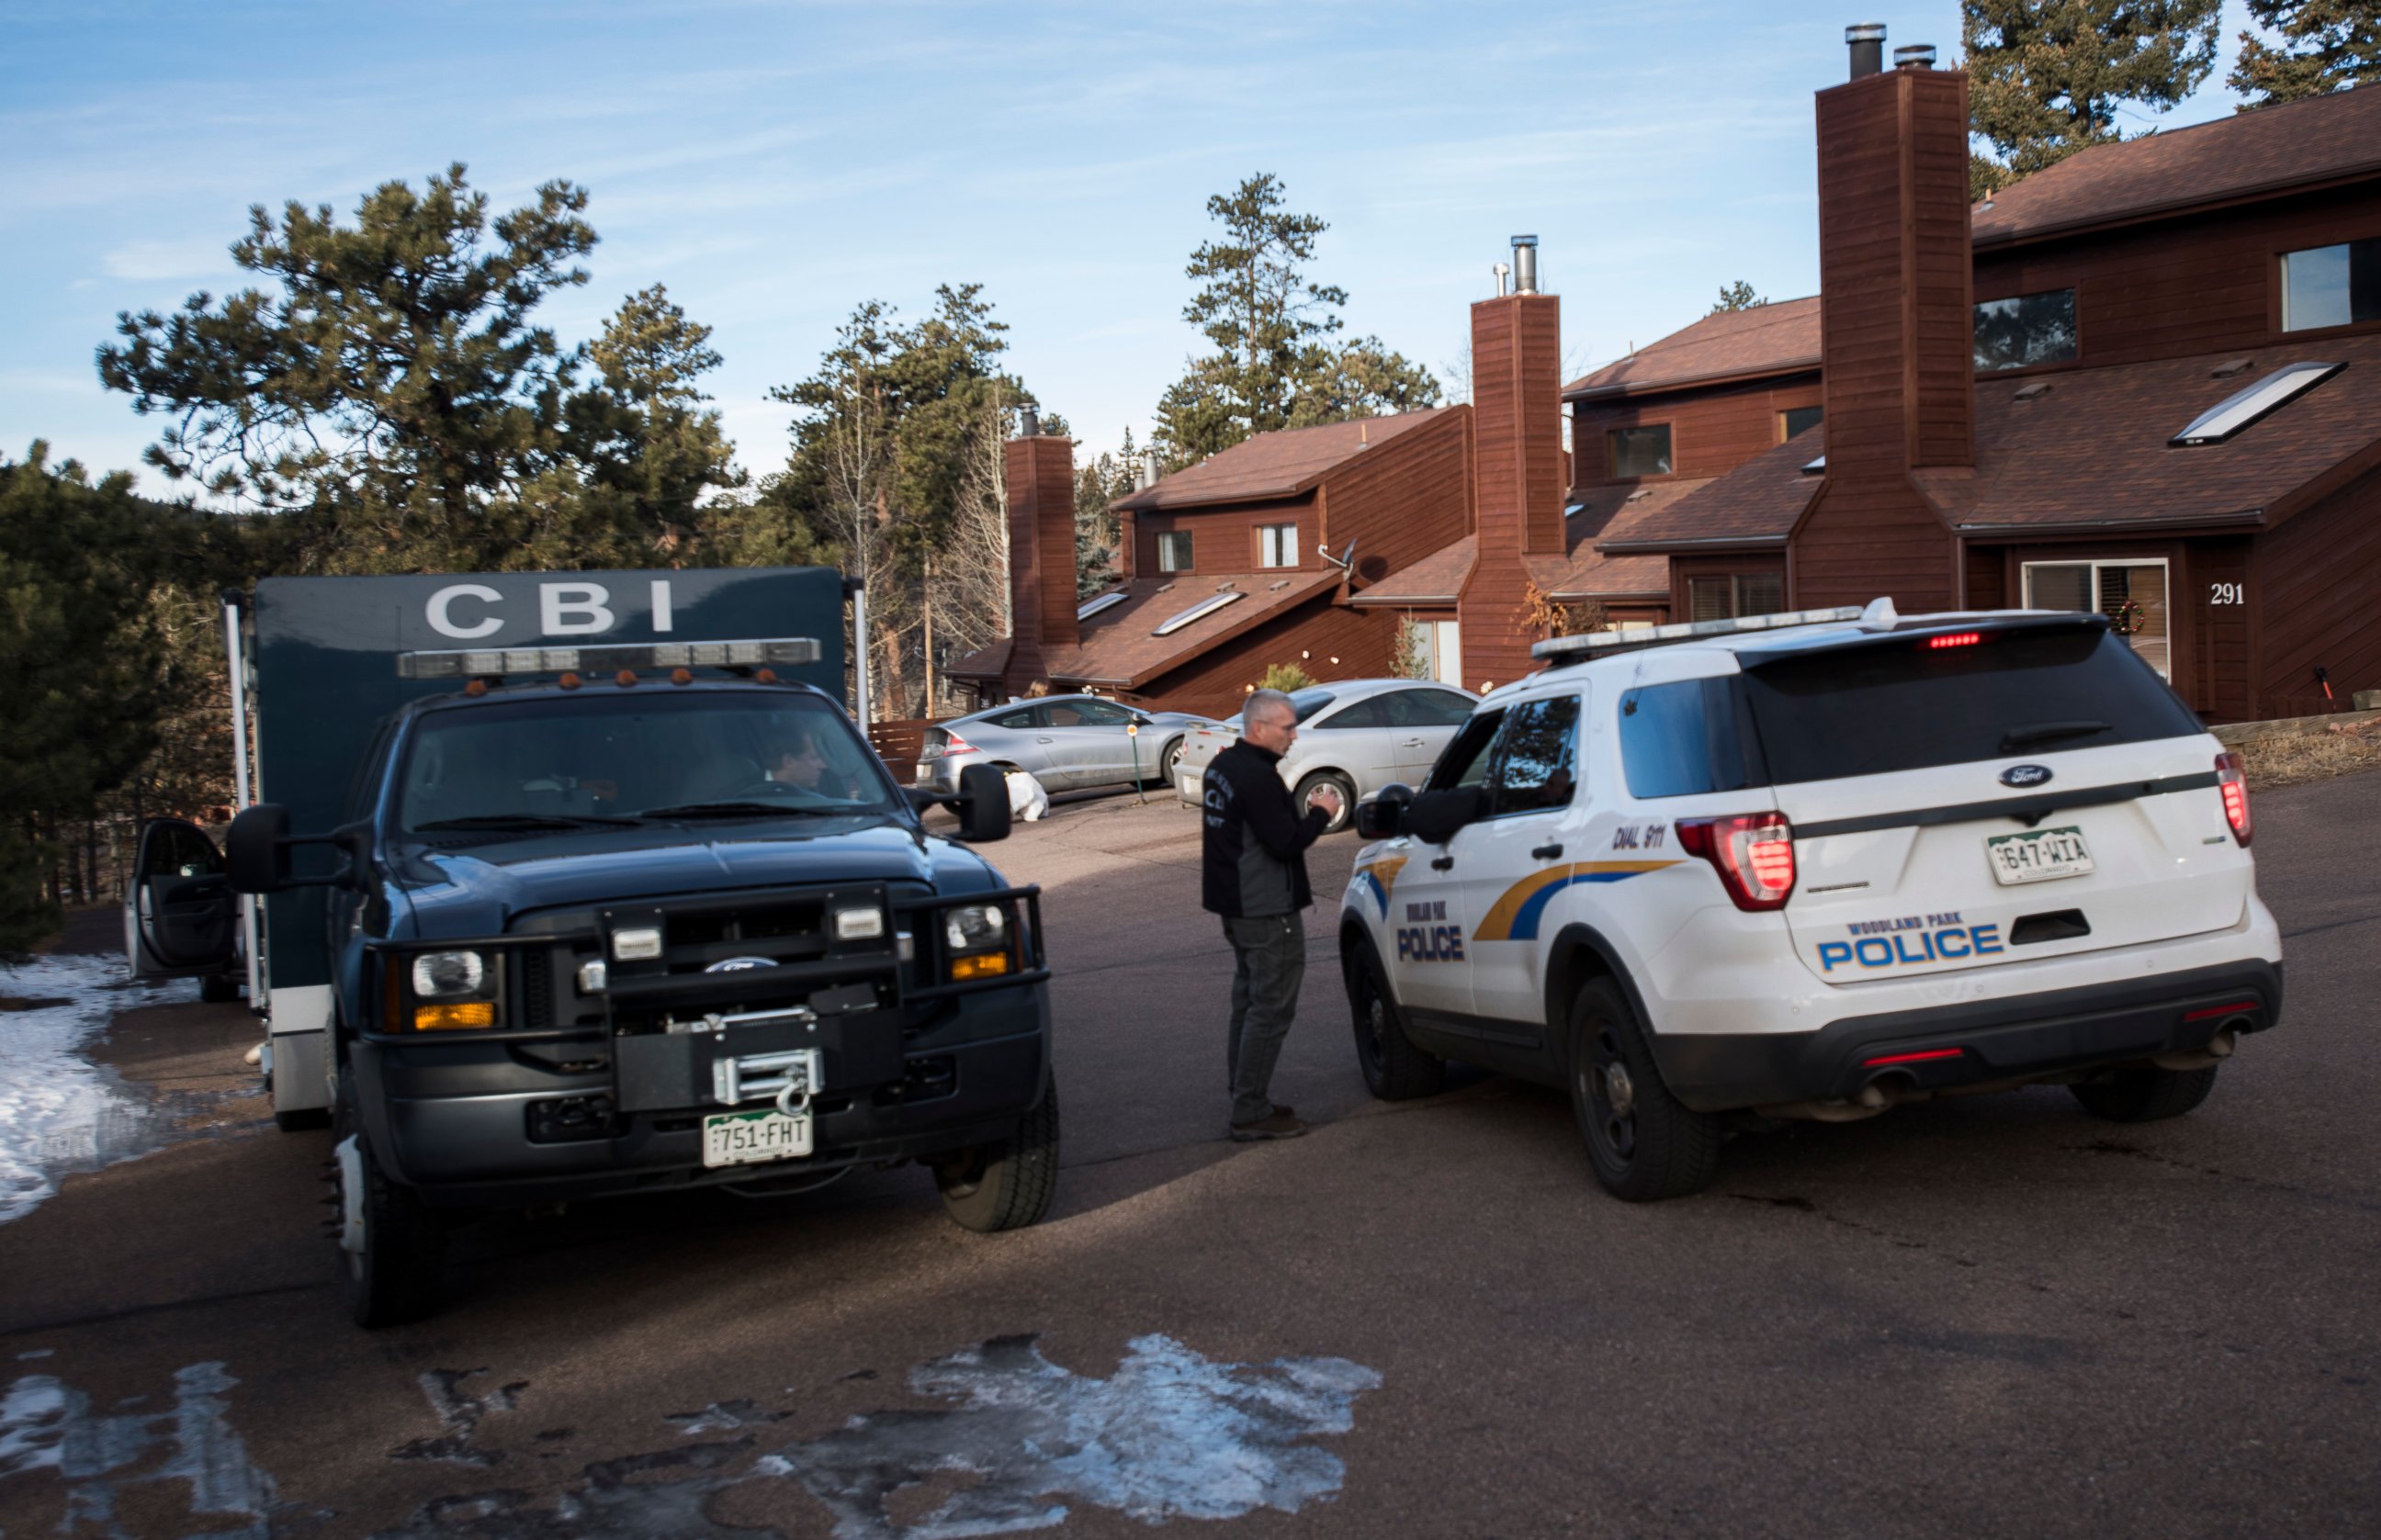 Members of the Colorado Bureau of Investigation and the Woodland Park, Colo., Police arrive Friday, Dec. 21, 2018, at the home of Kelsey Berreth, who has been missing since Thanksgiving. Police arrested her fiance Patrick Frazee earlier in the mornin